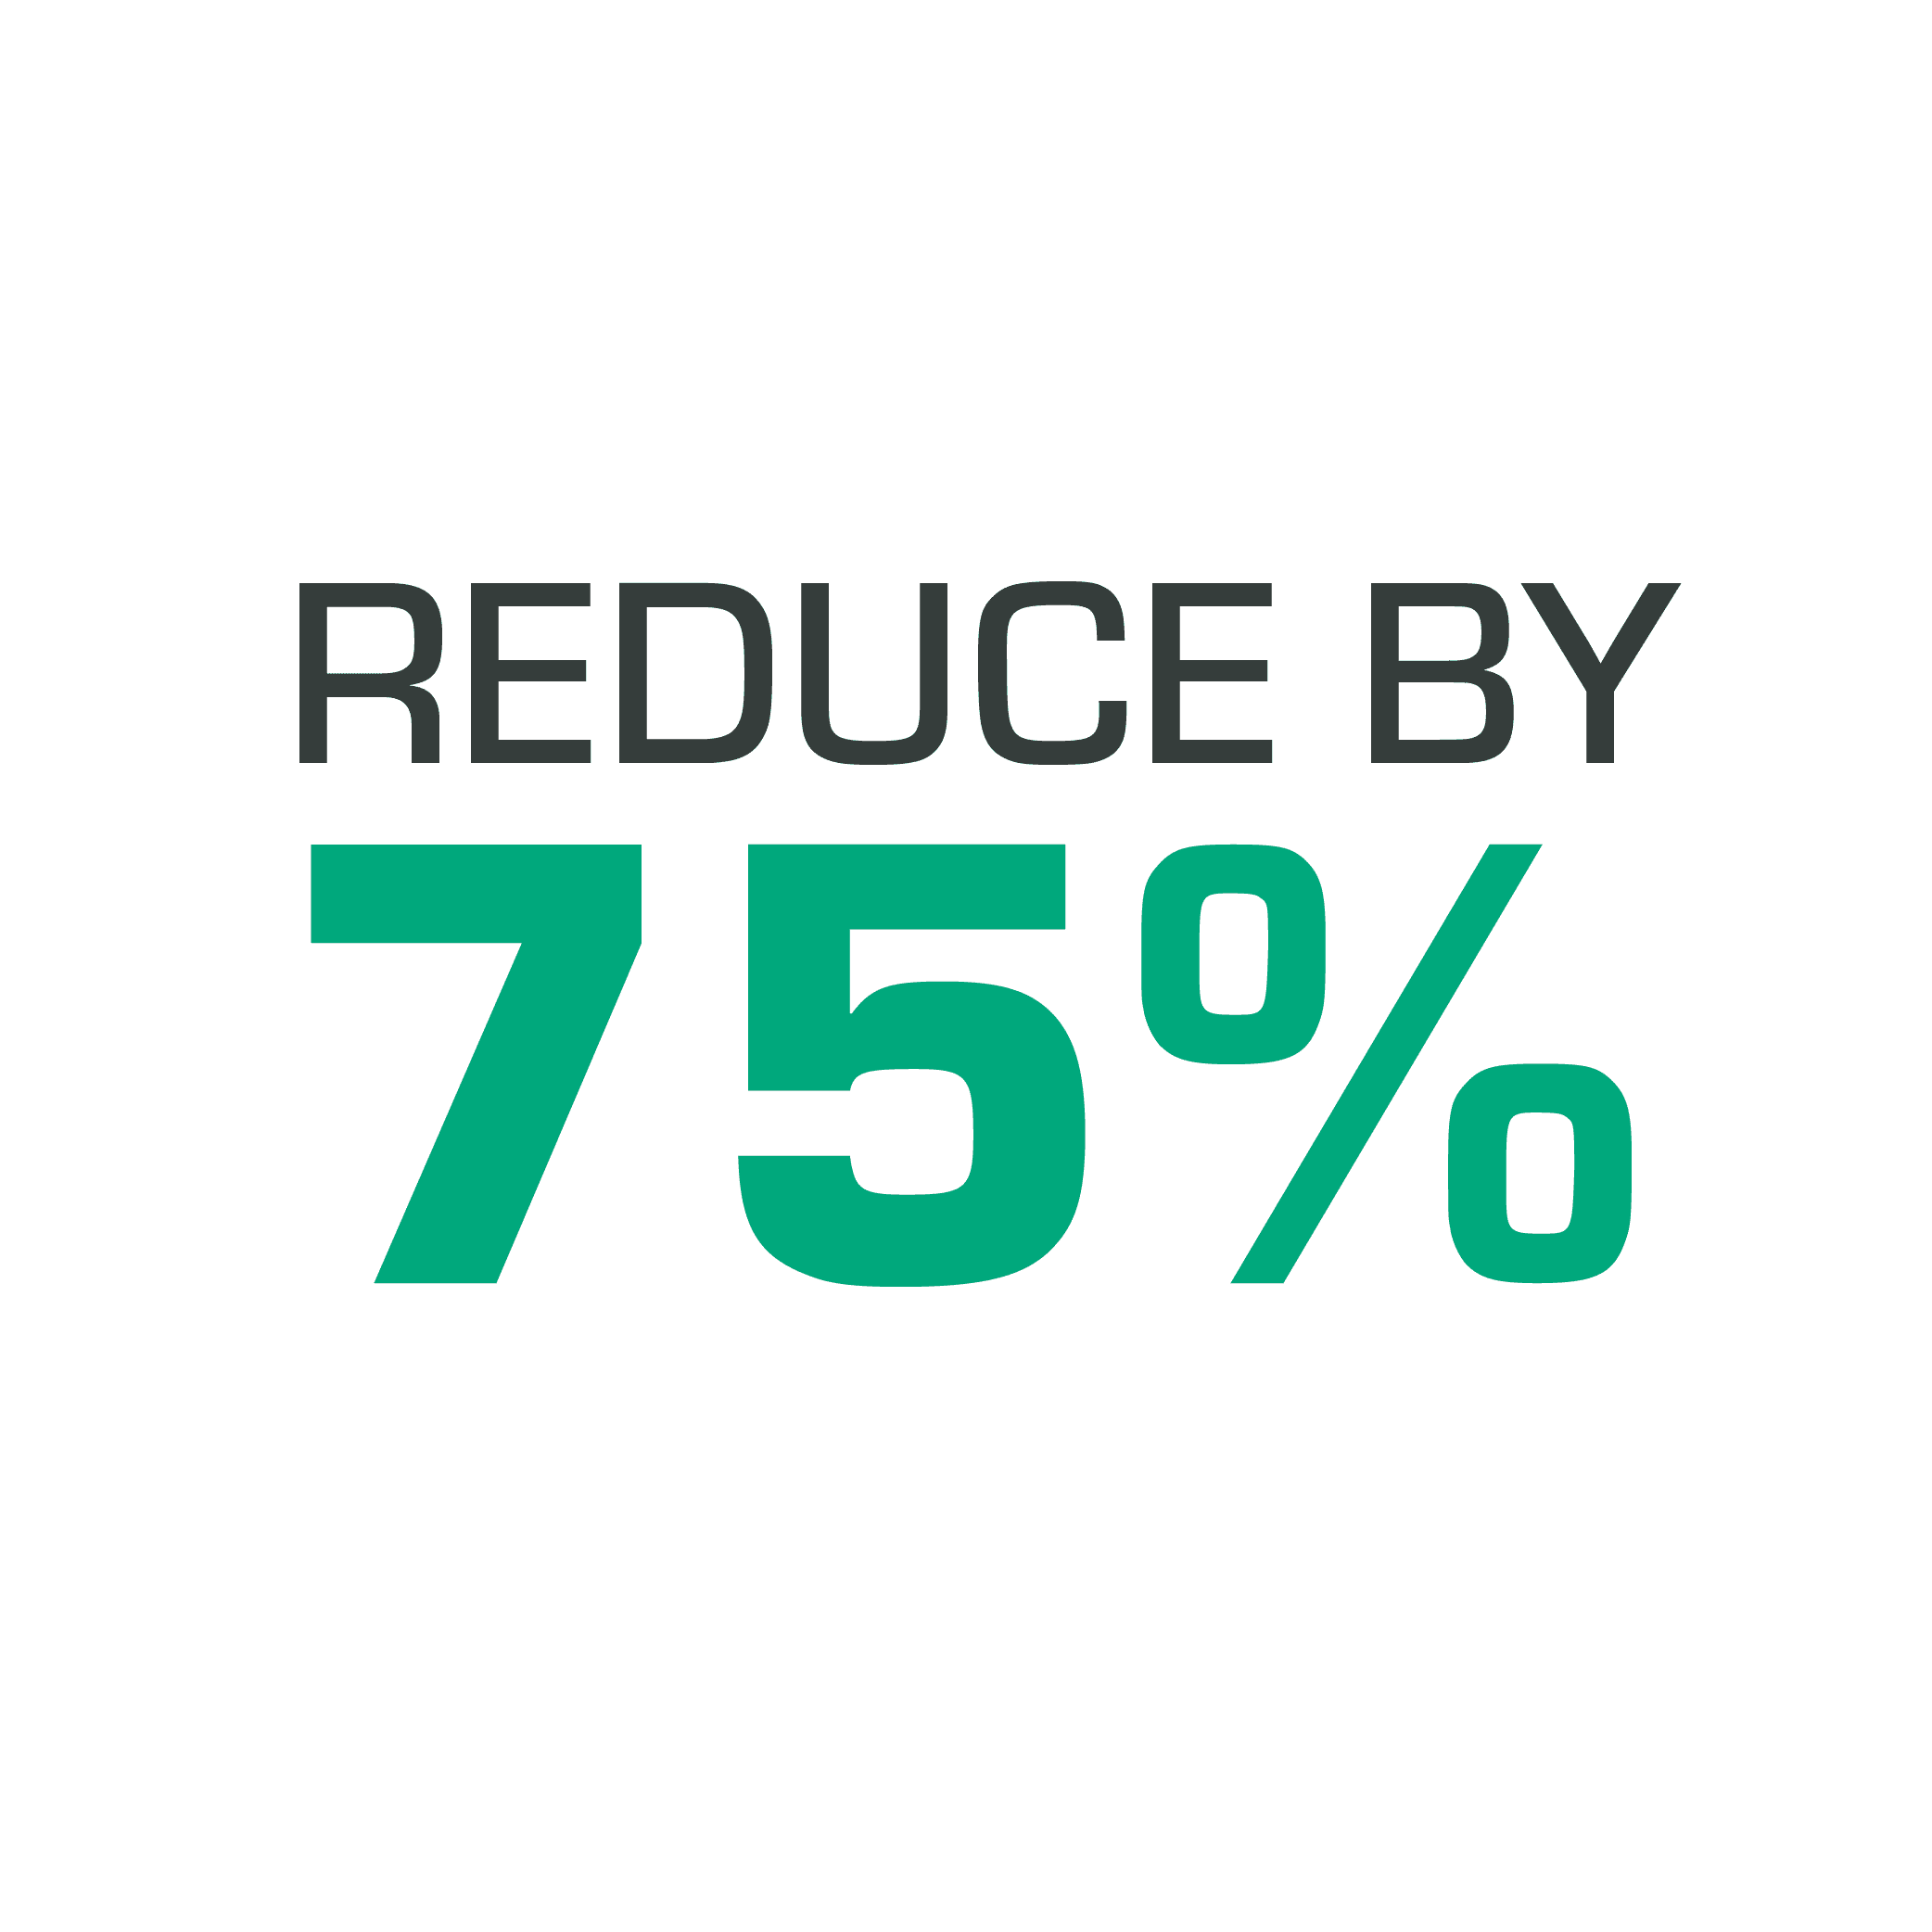 REDUCE BY 75%